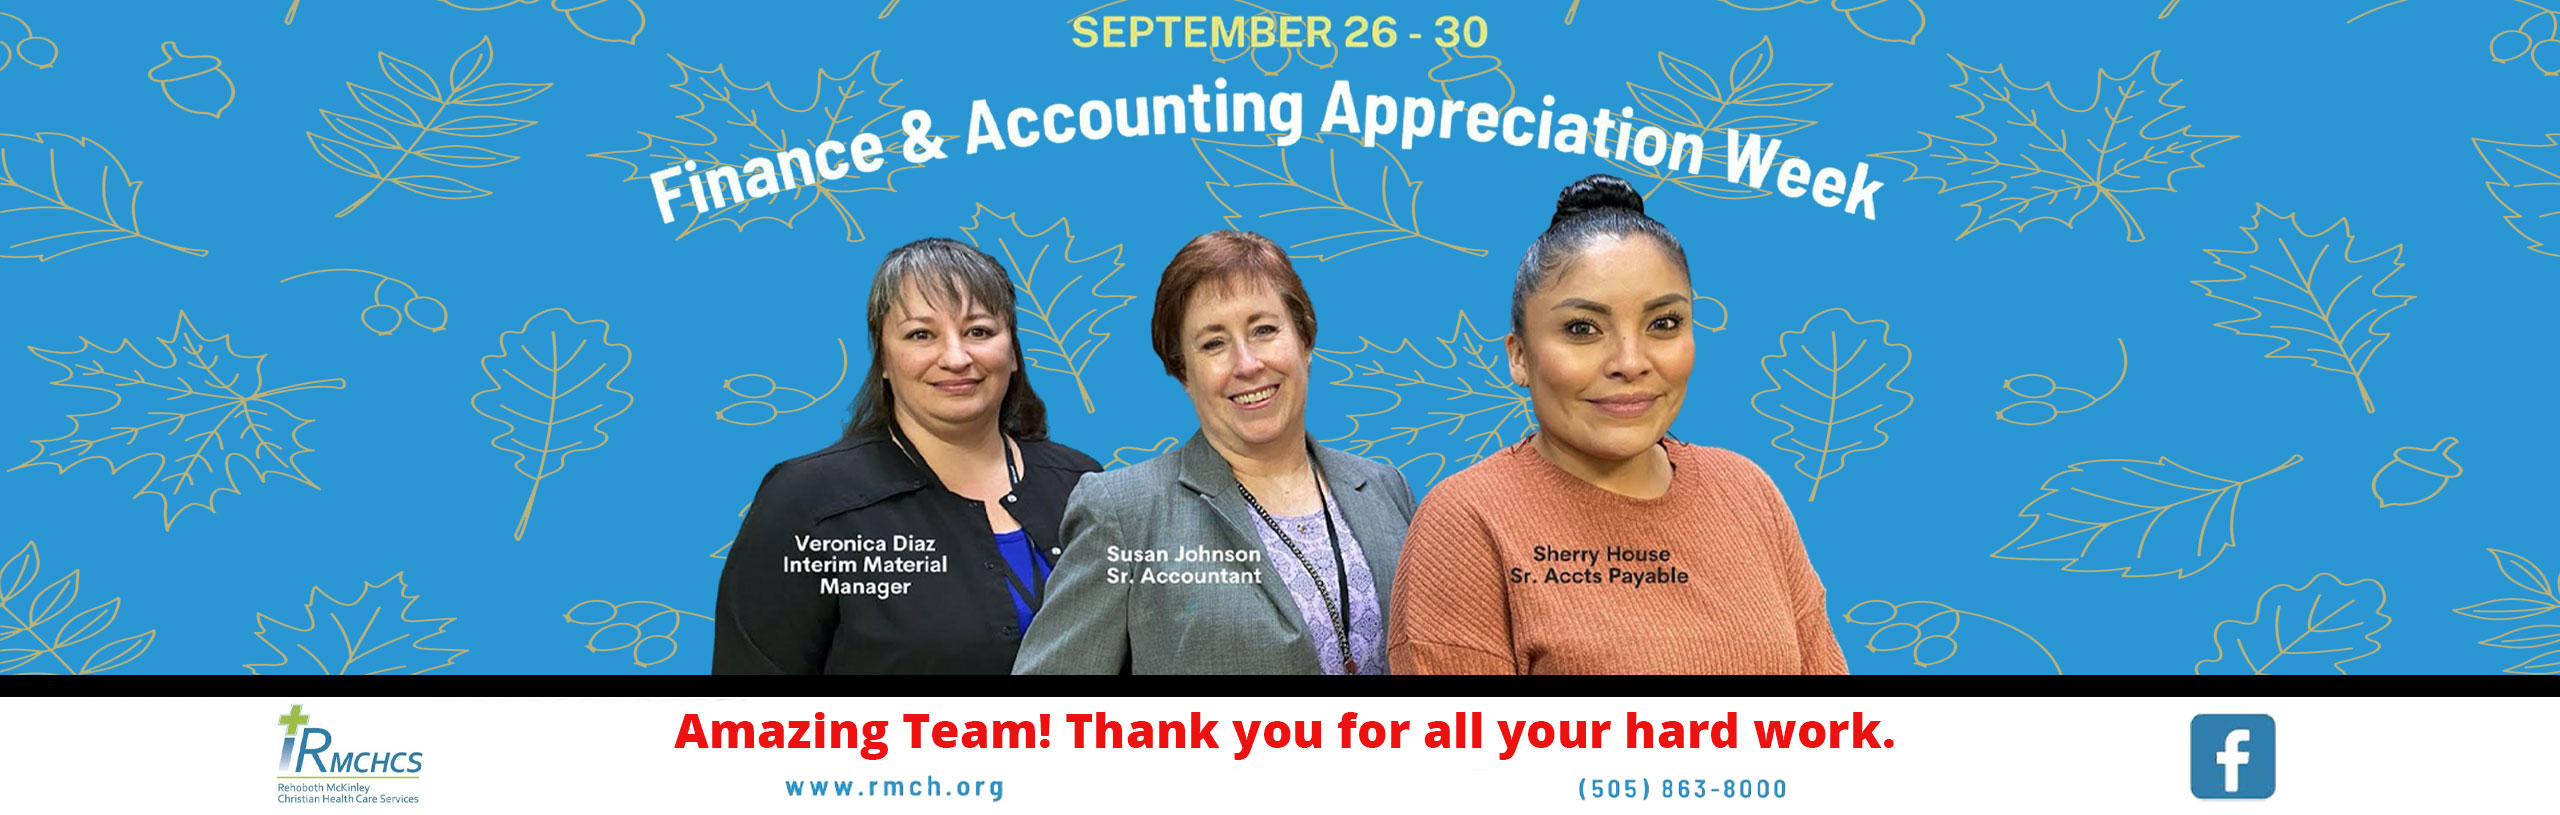 SEPTEMBER 26-30

Finance and Accounting Appreciation Week

-Veronica Diaz: Interim Material Manager
-Susan Johnson: Sr. Accountant
-Sherry House: Sr.Acct Payable

Amazing Team! Thank you for all your hard work.

www.rmch.org
(505)863-8000